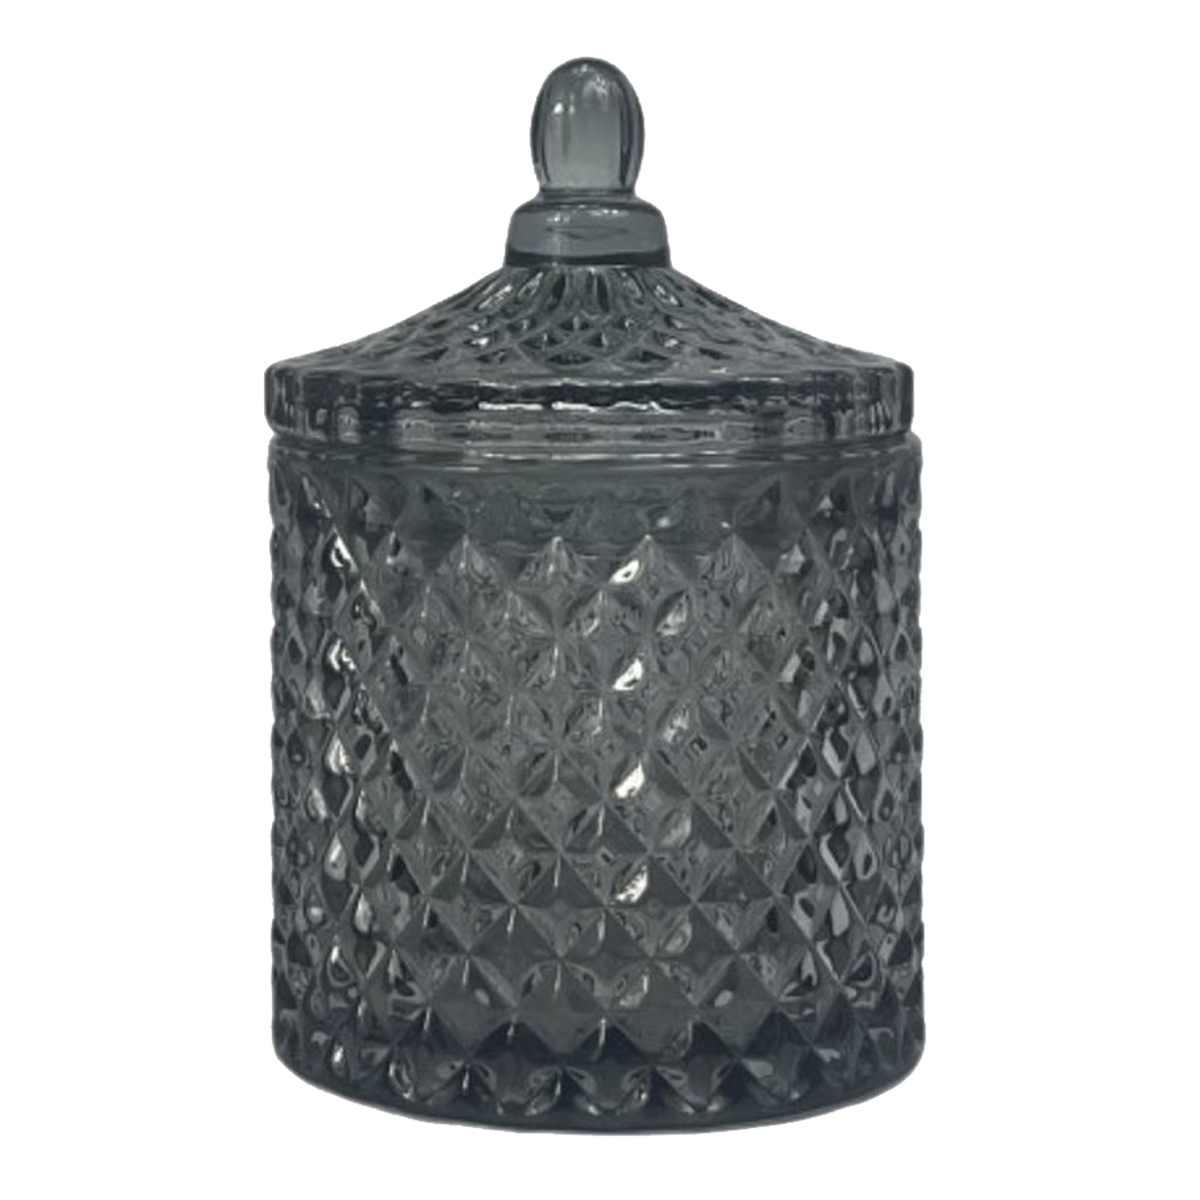 Charcoal candle vessel